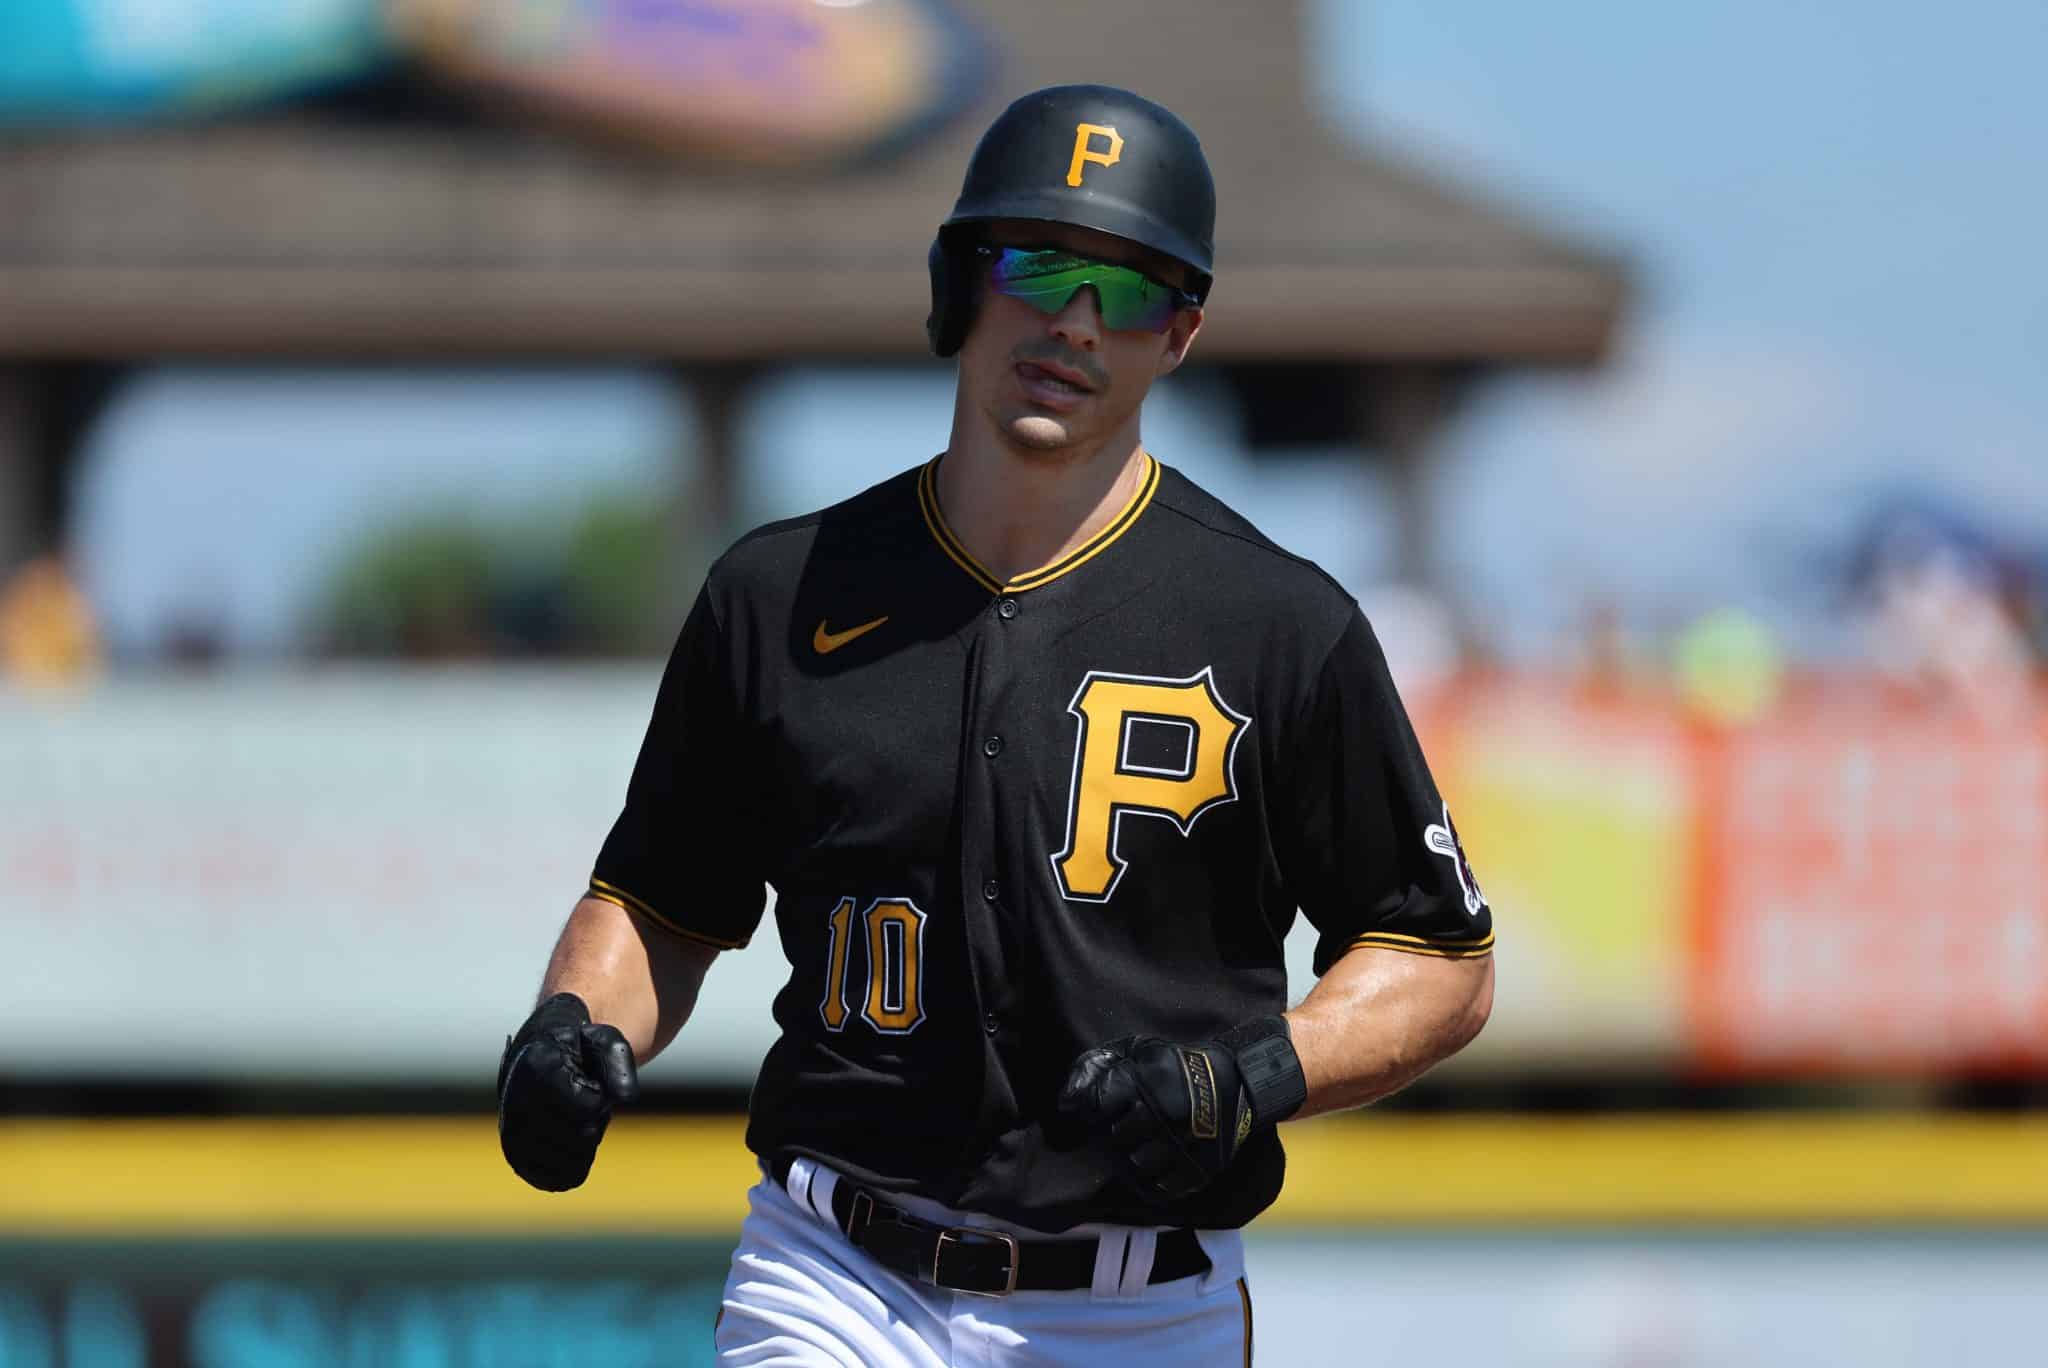 Pittsburgh Pirates: Could the Yankees Push for Bryan Reynolds?